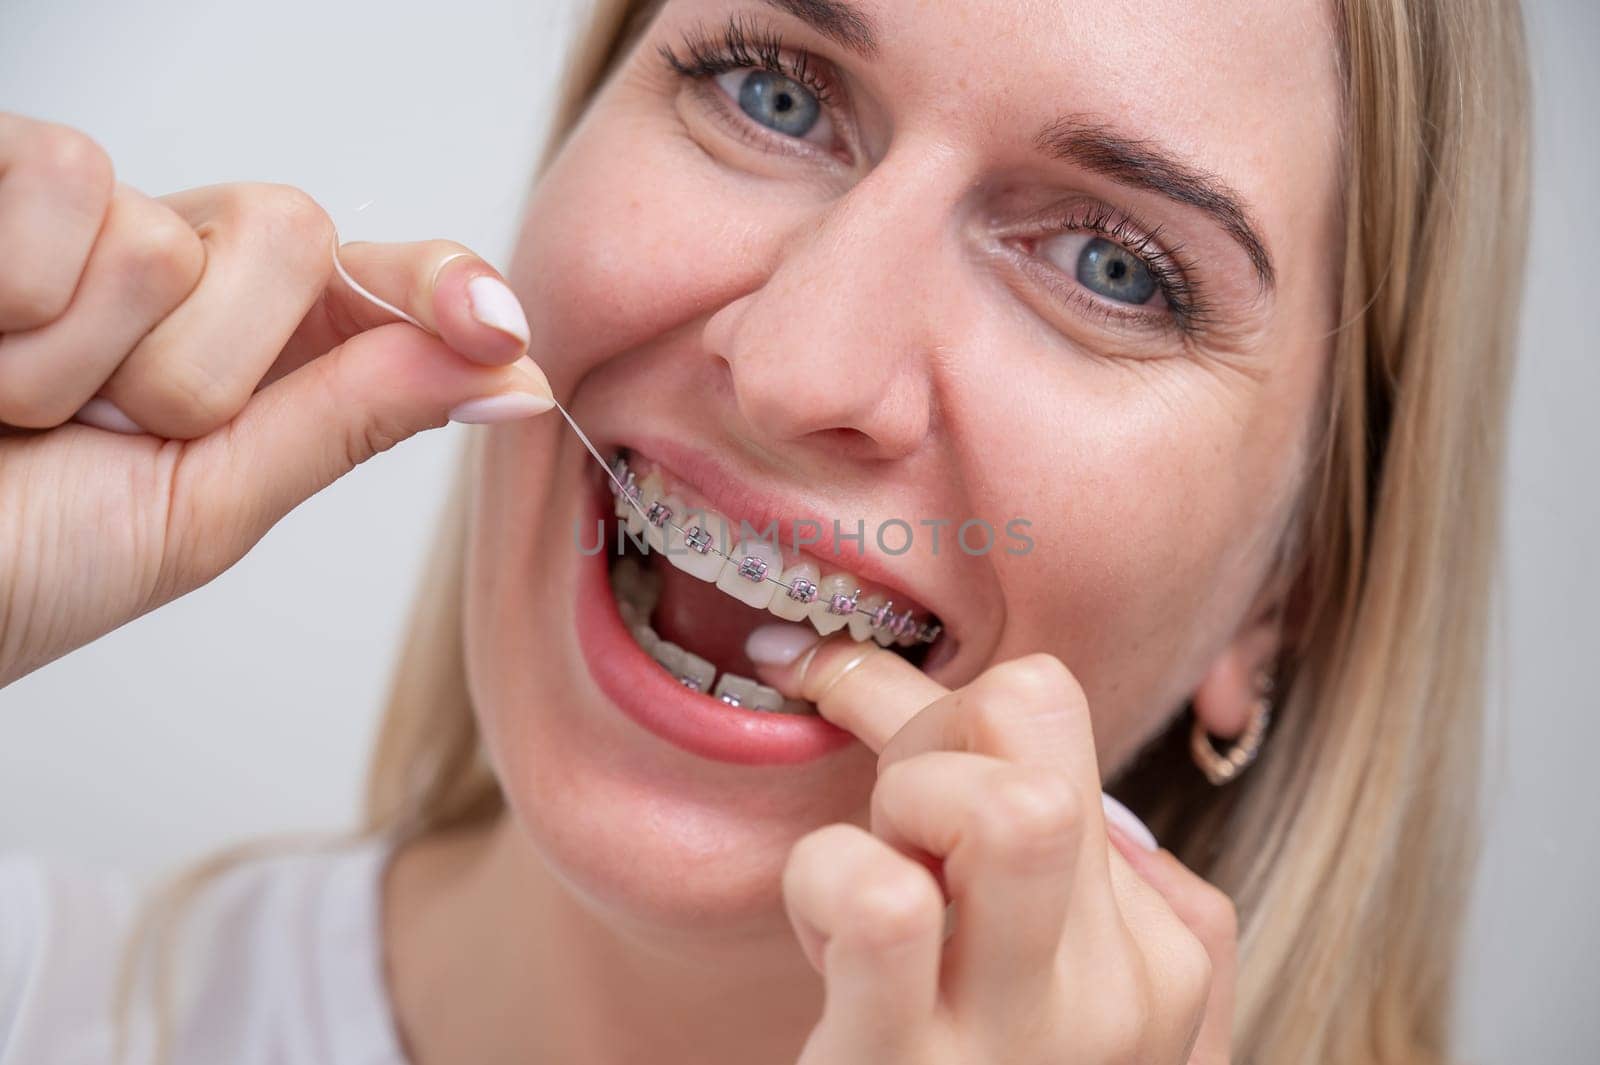 Caucasian woman cleaning her teeth with braces using dental floss. by mrwed54